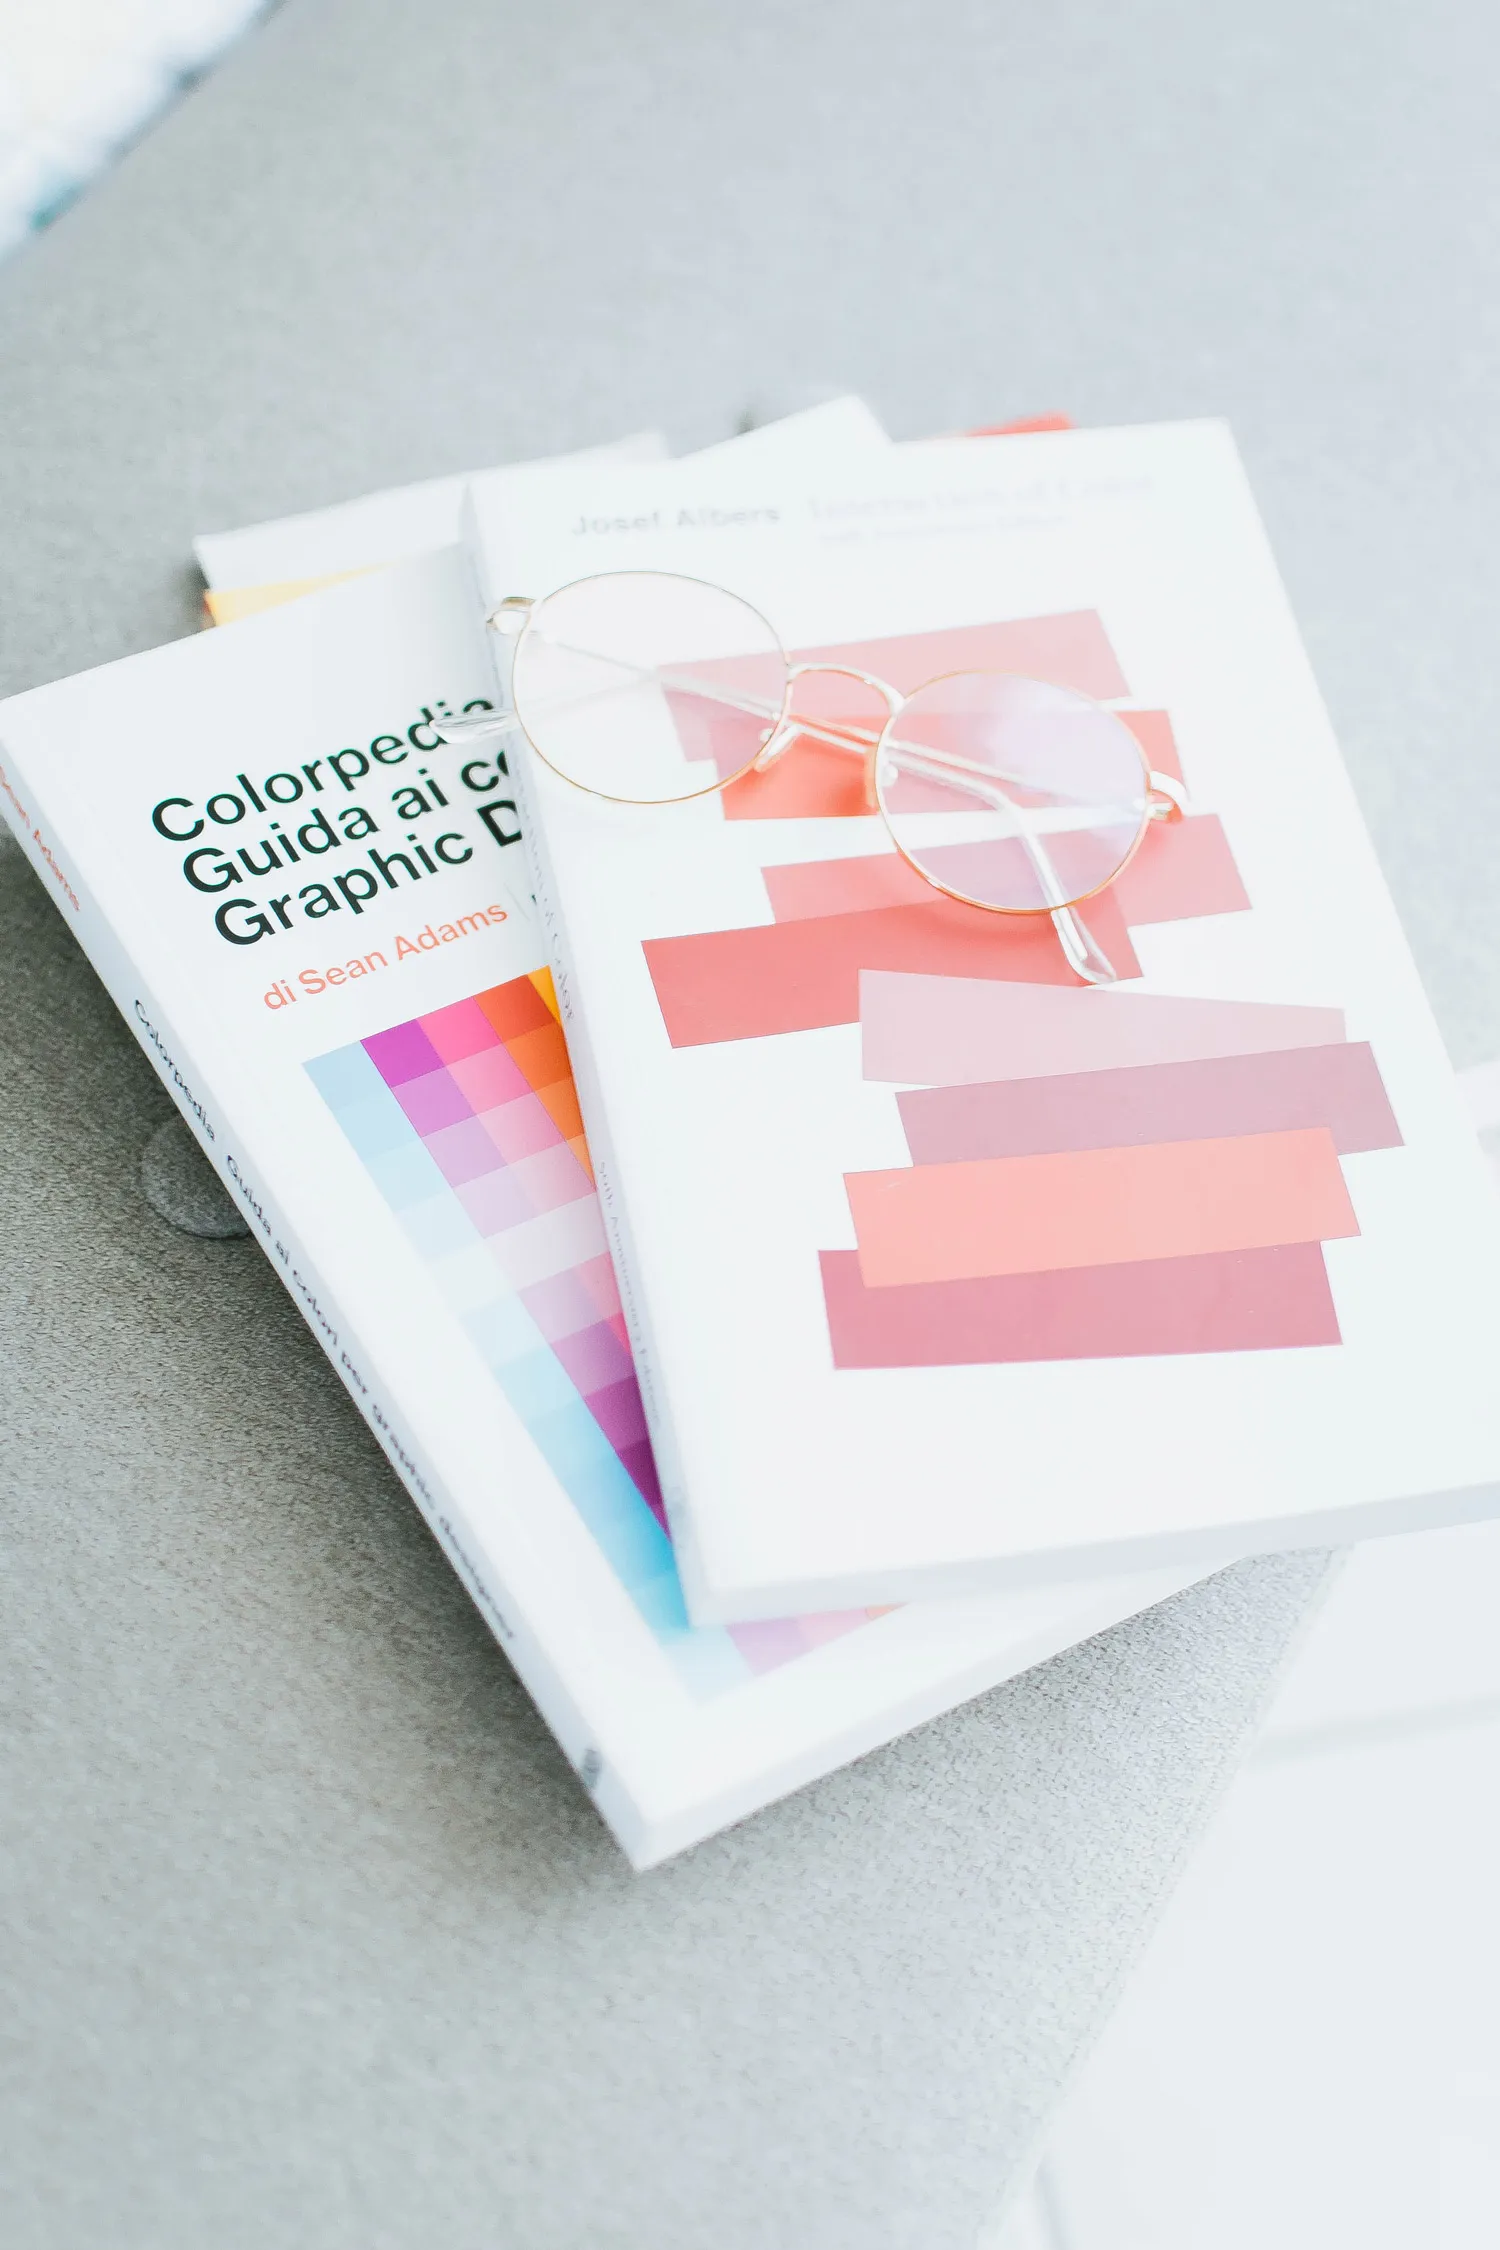 Books to understand the importance of color psychology in branding for small businesses